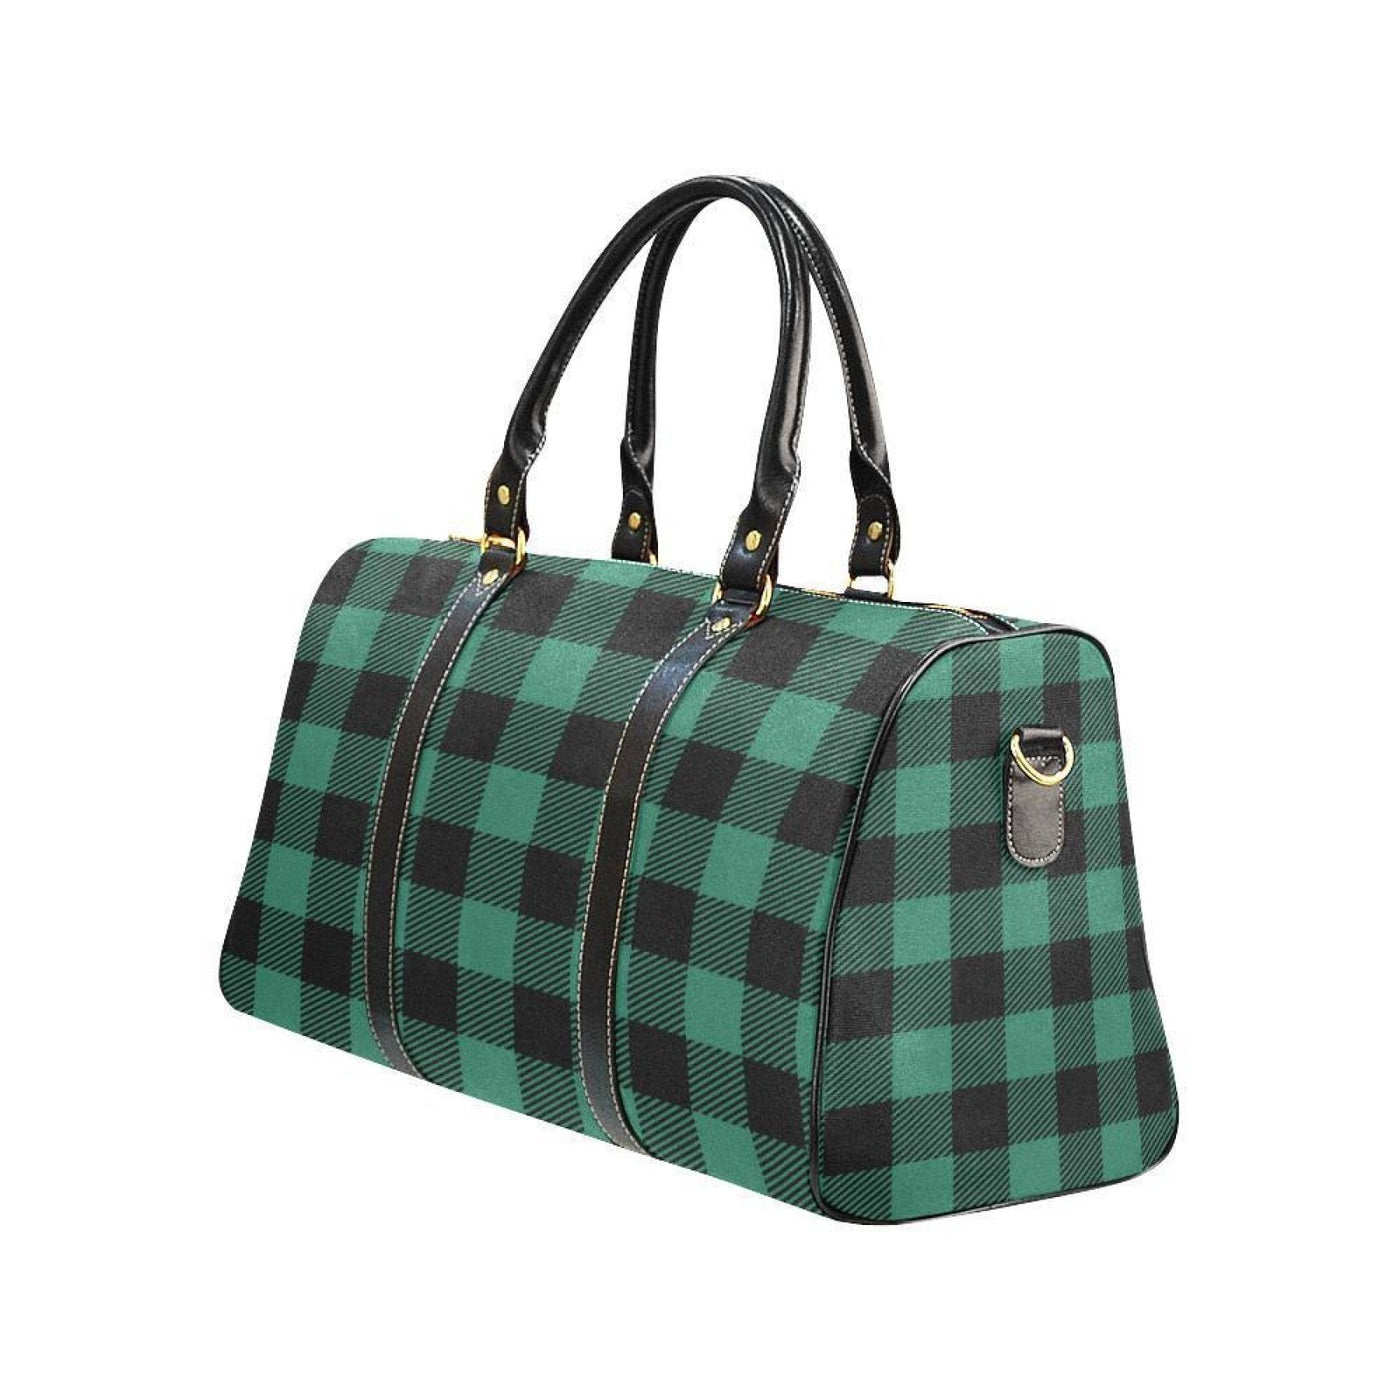 Travel Bag Leather Carry On Large Luggage Bag Green Plaid - Bags | Travel Bags |